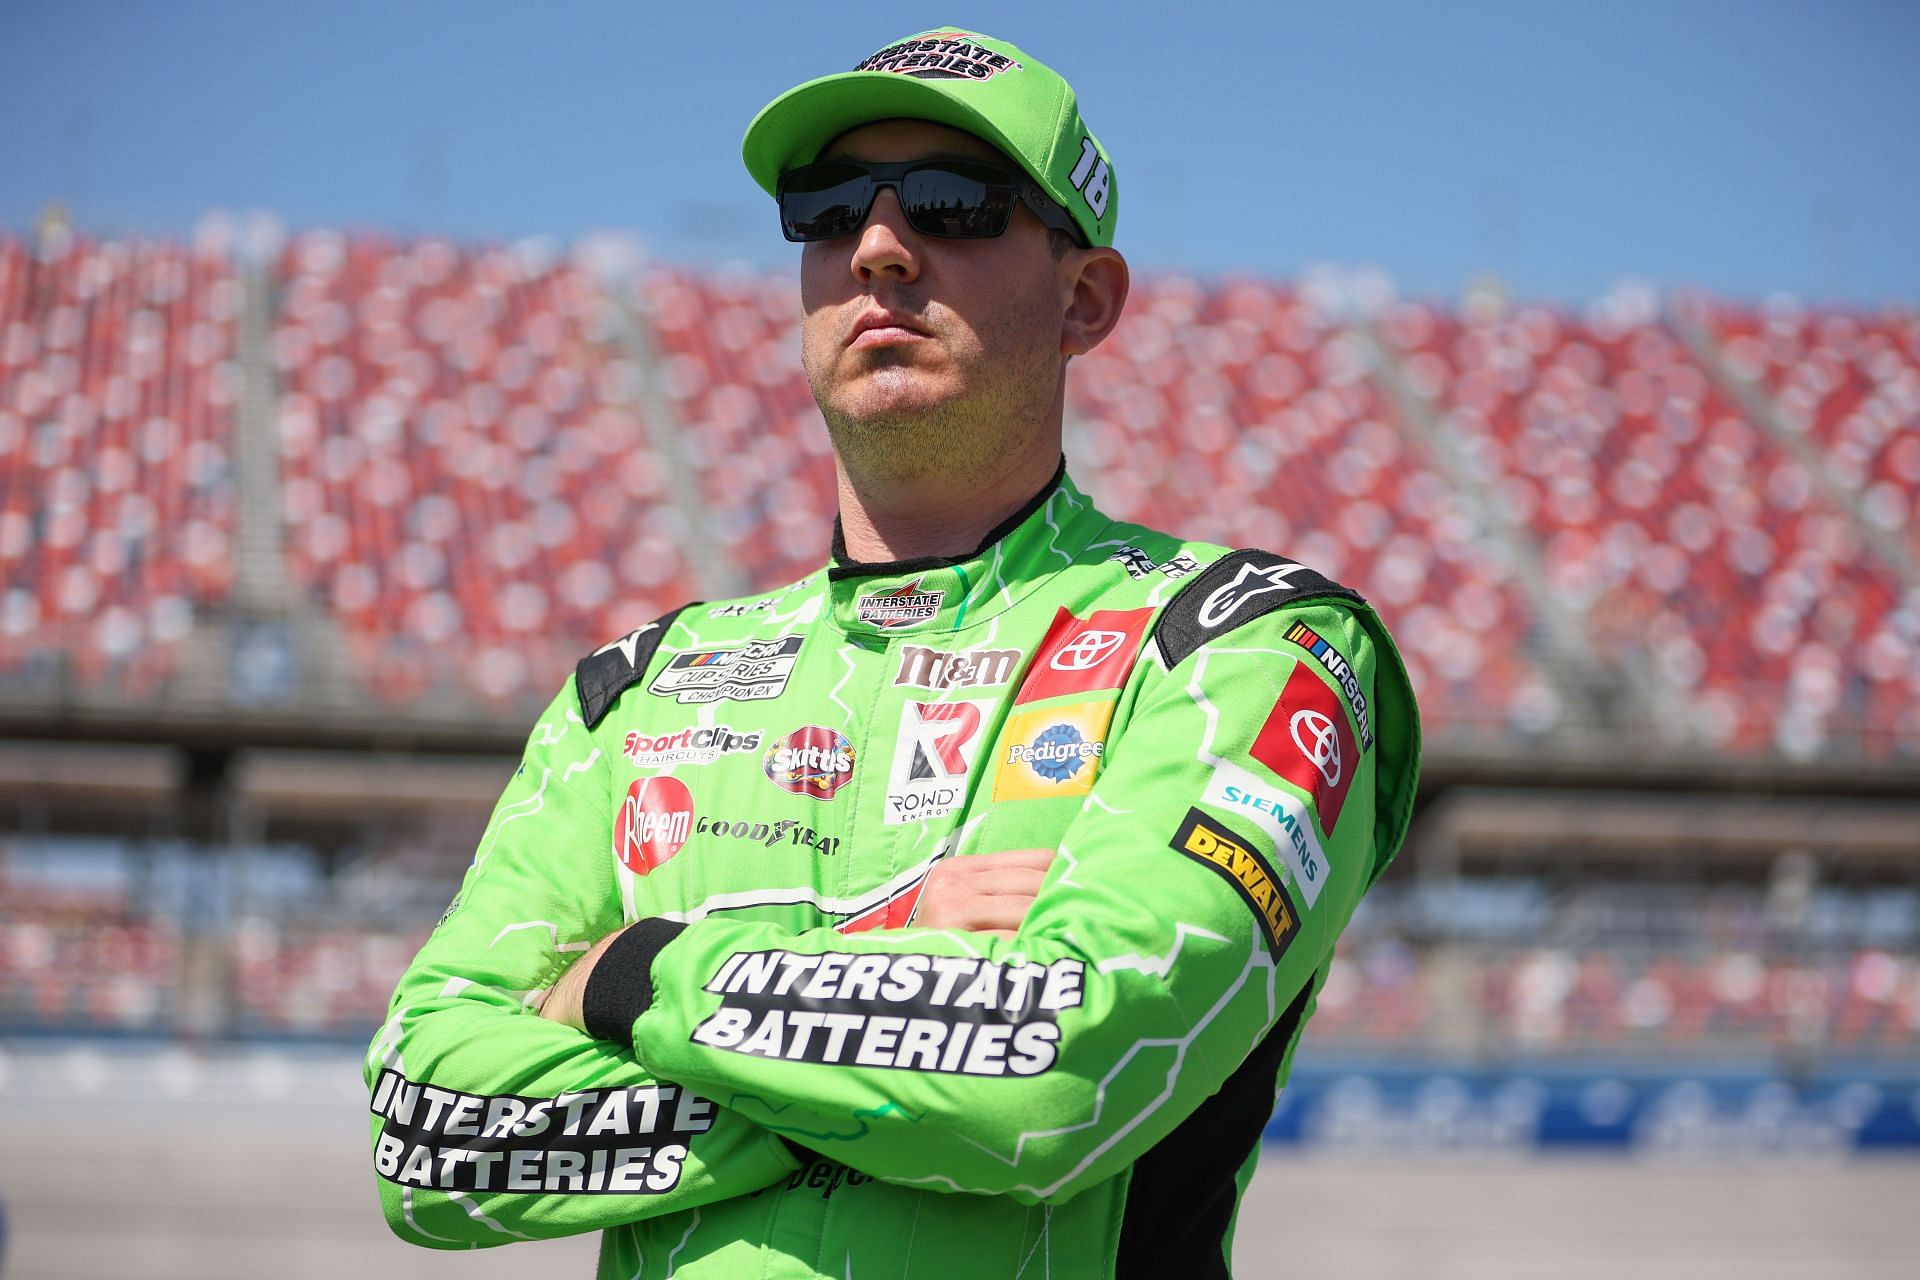 Kyle Busch looks on during qualifying for the NASCAR Cup Series GEICO 500 at Talladega Superspeedway.